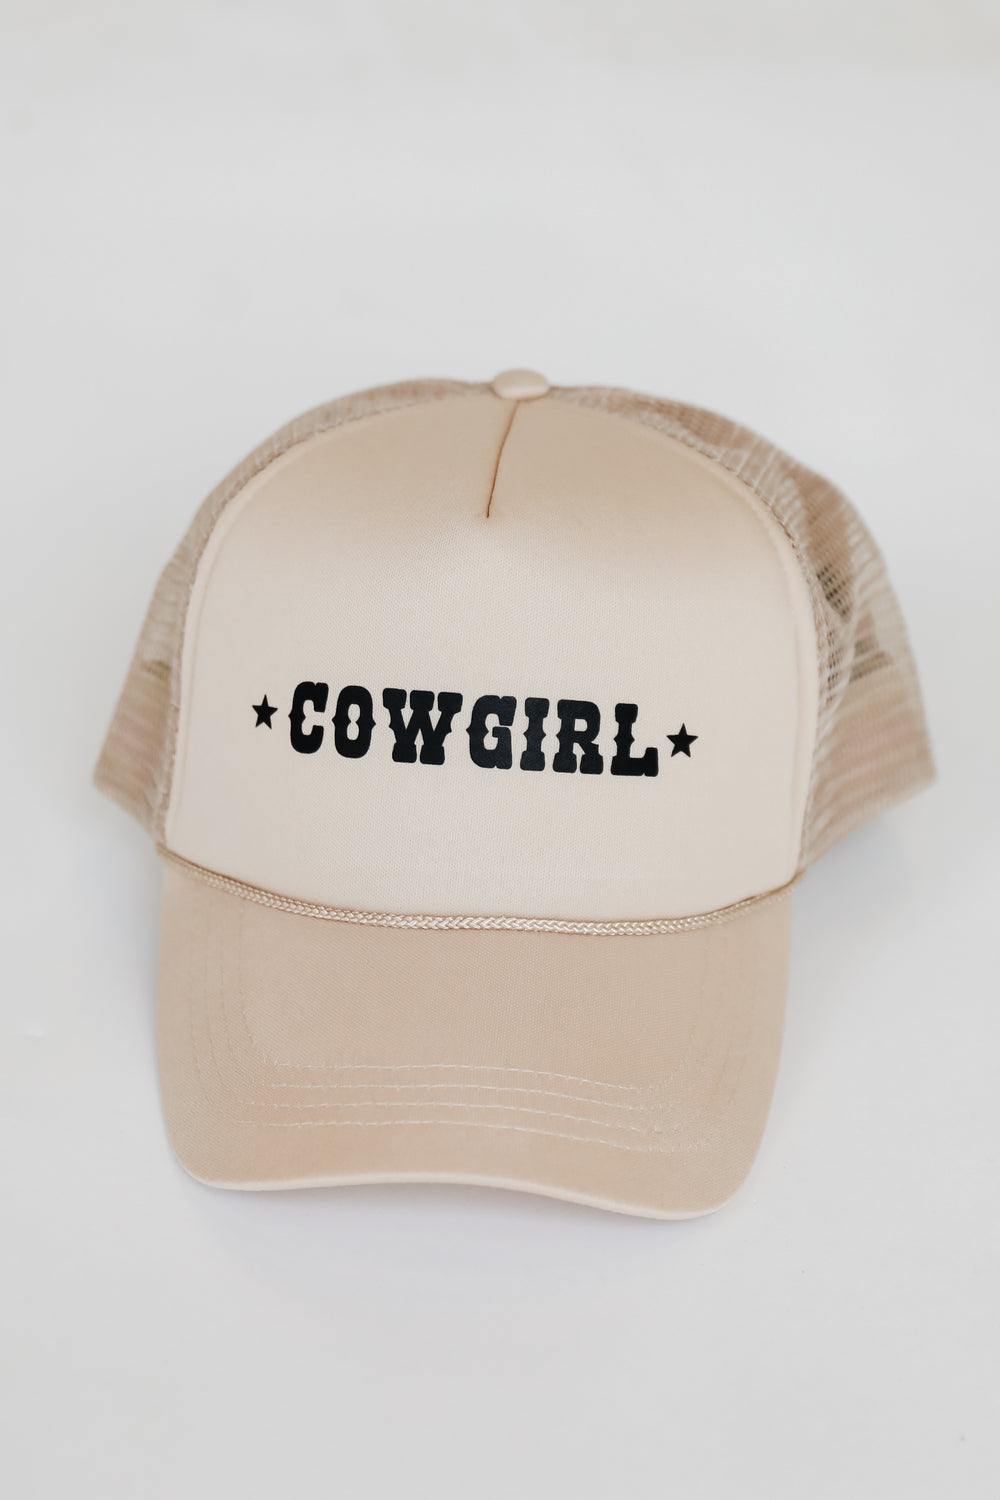 Cowgirl Trucker Hat from dress up